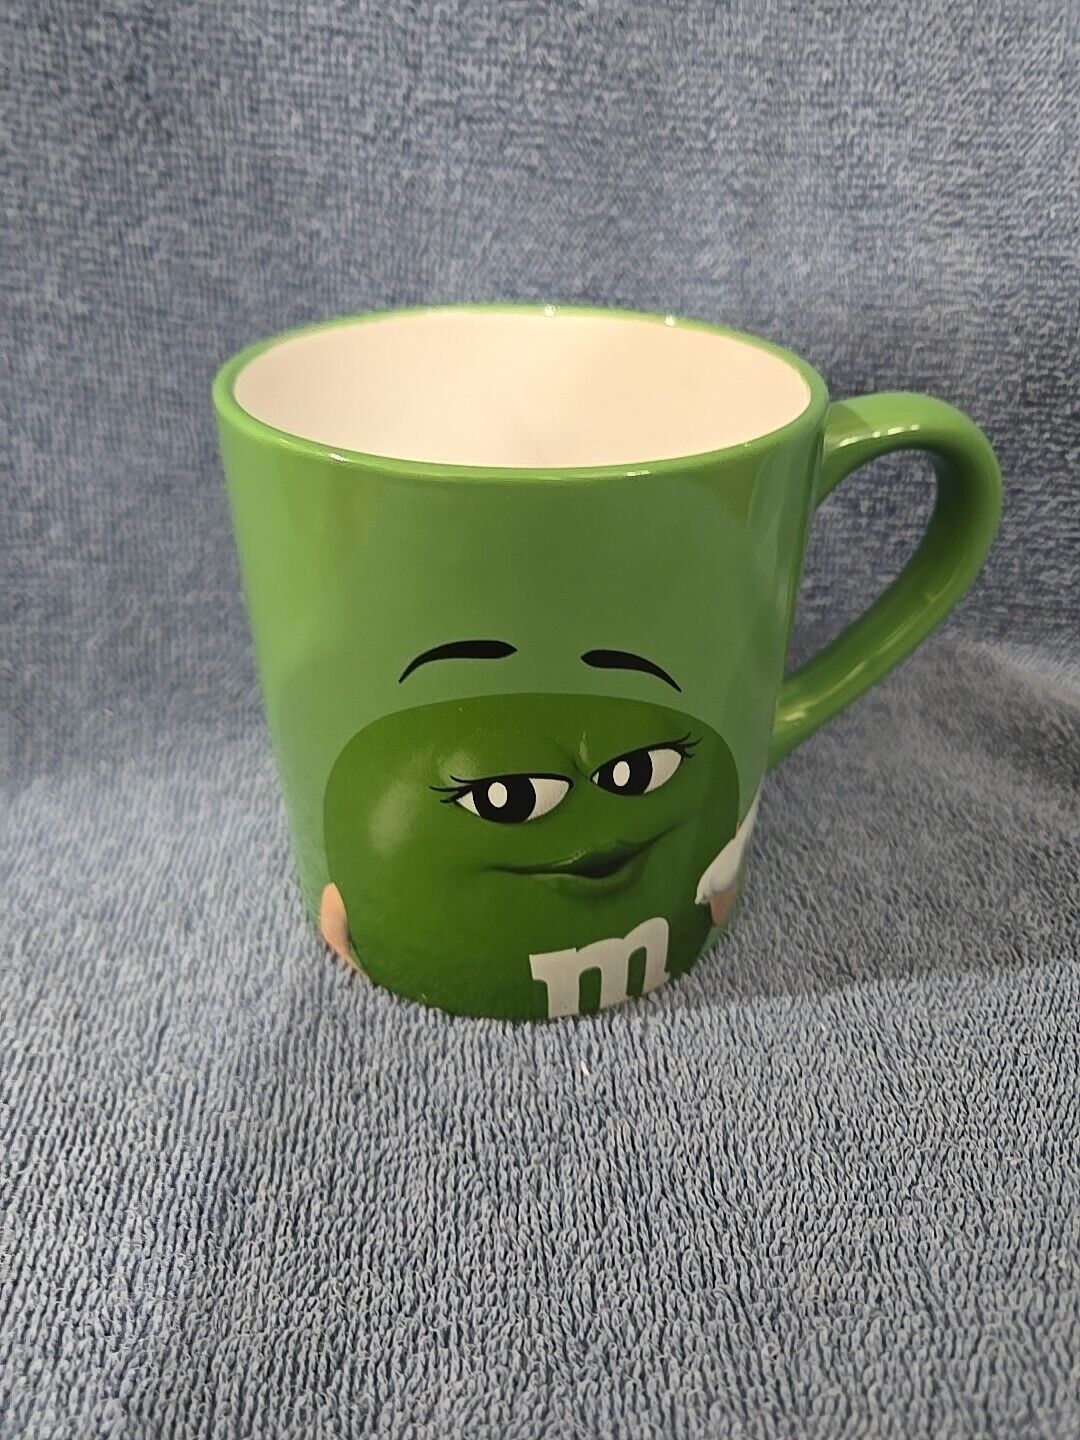 Sexy Green M&M’s Eat Your Heart Out, Darling Large Ceramic Coffee Mug Tea Cup